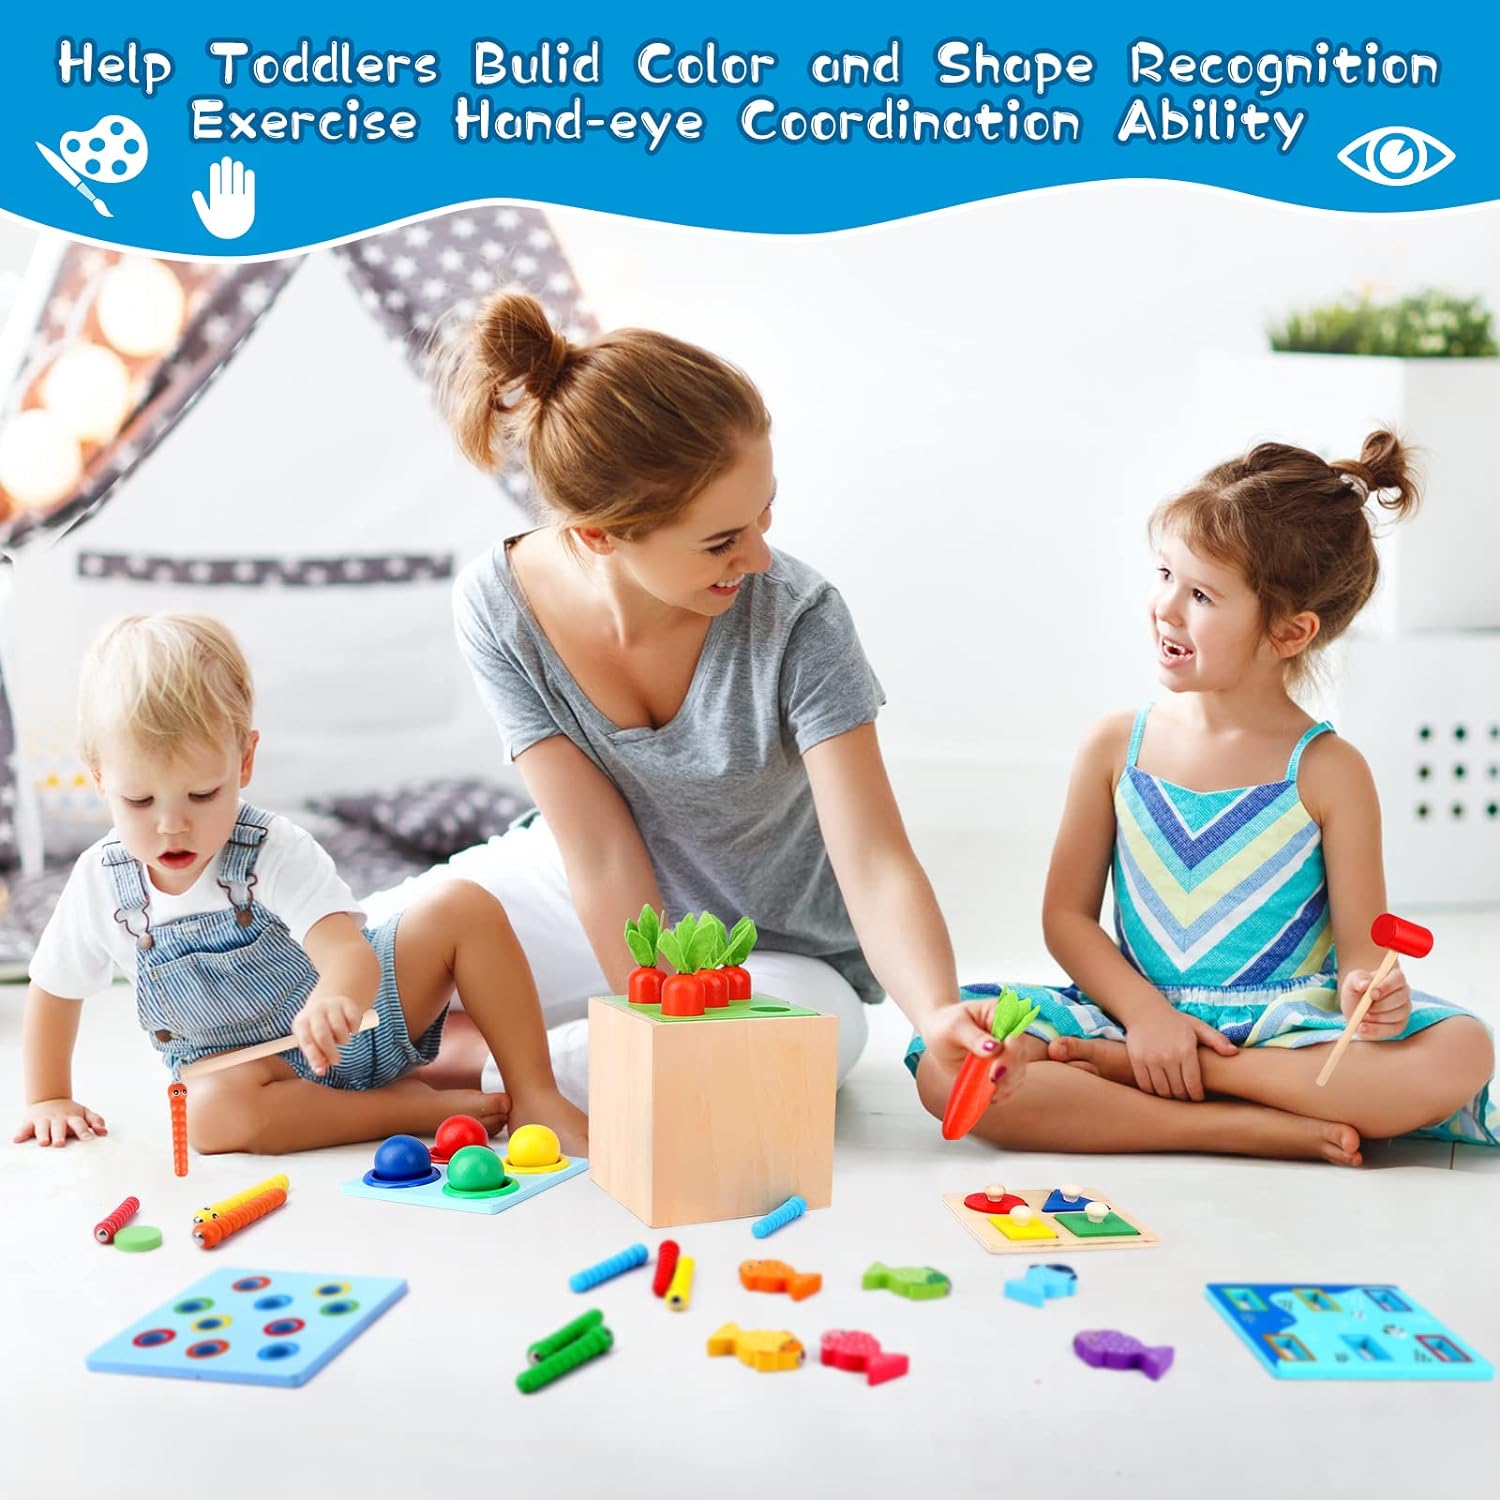 Wooden-Play-Kit 5 in 1 Montessori Play